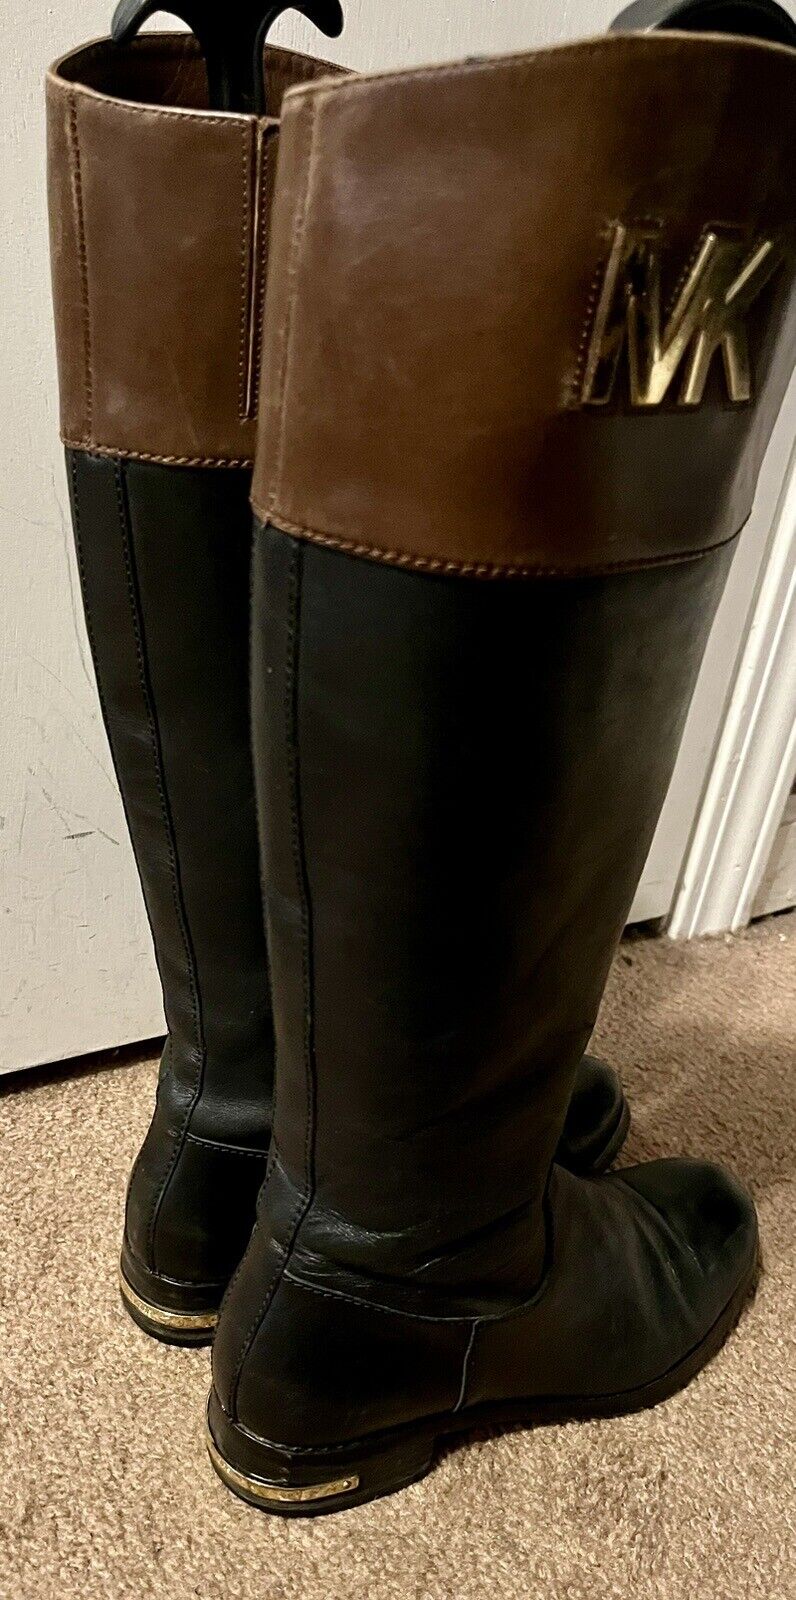 MICHAEL KORS 'HAYLEY,' LADY'S 6.5 M, TALL RIDING BOOTS, BLACK W/ BROWN ...